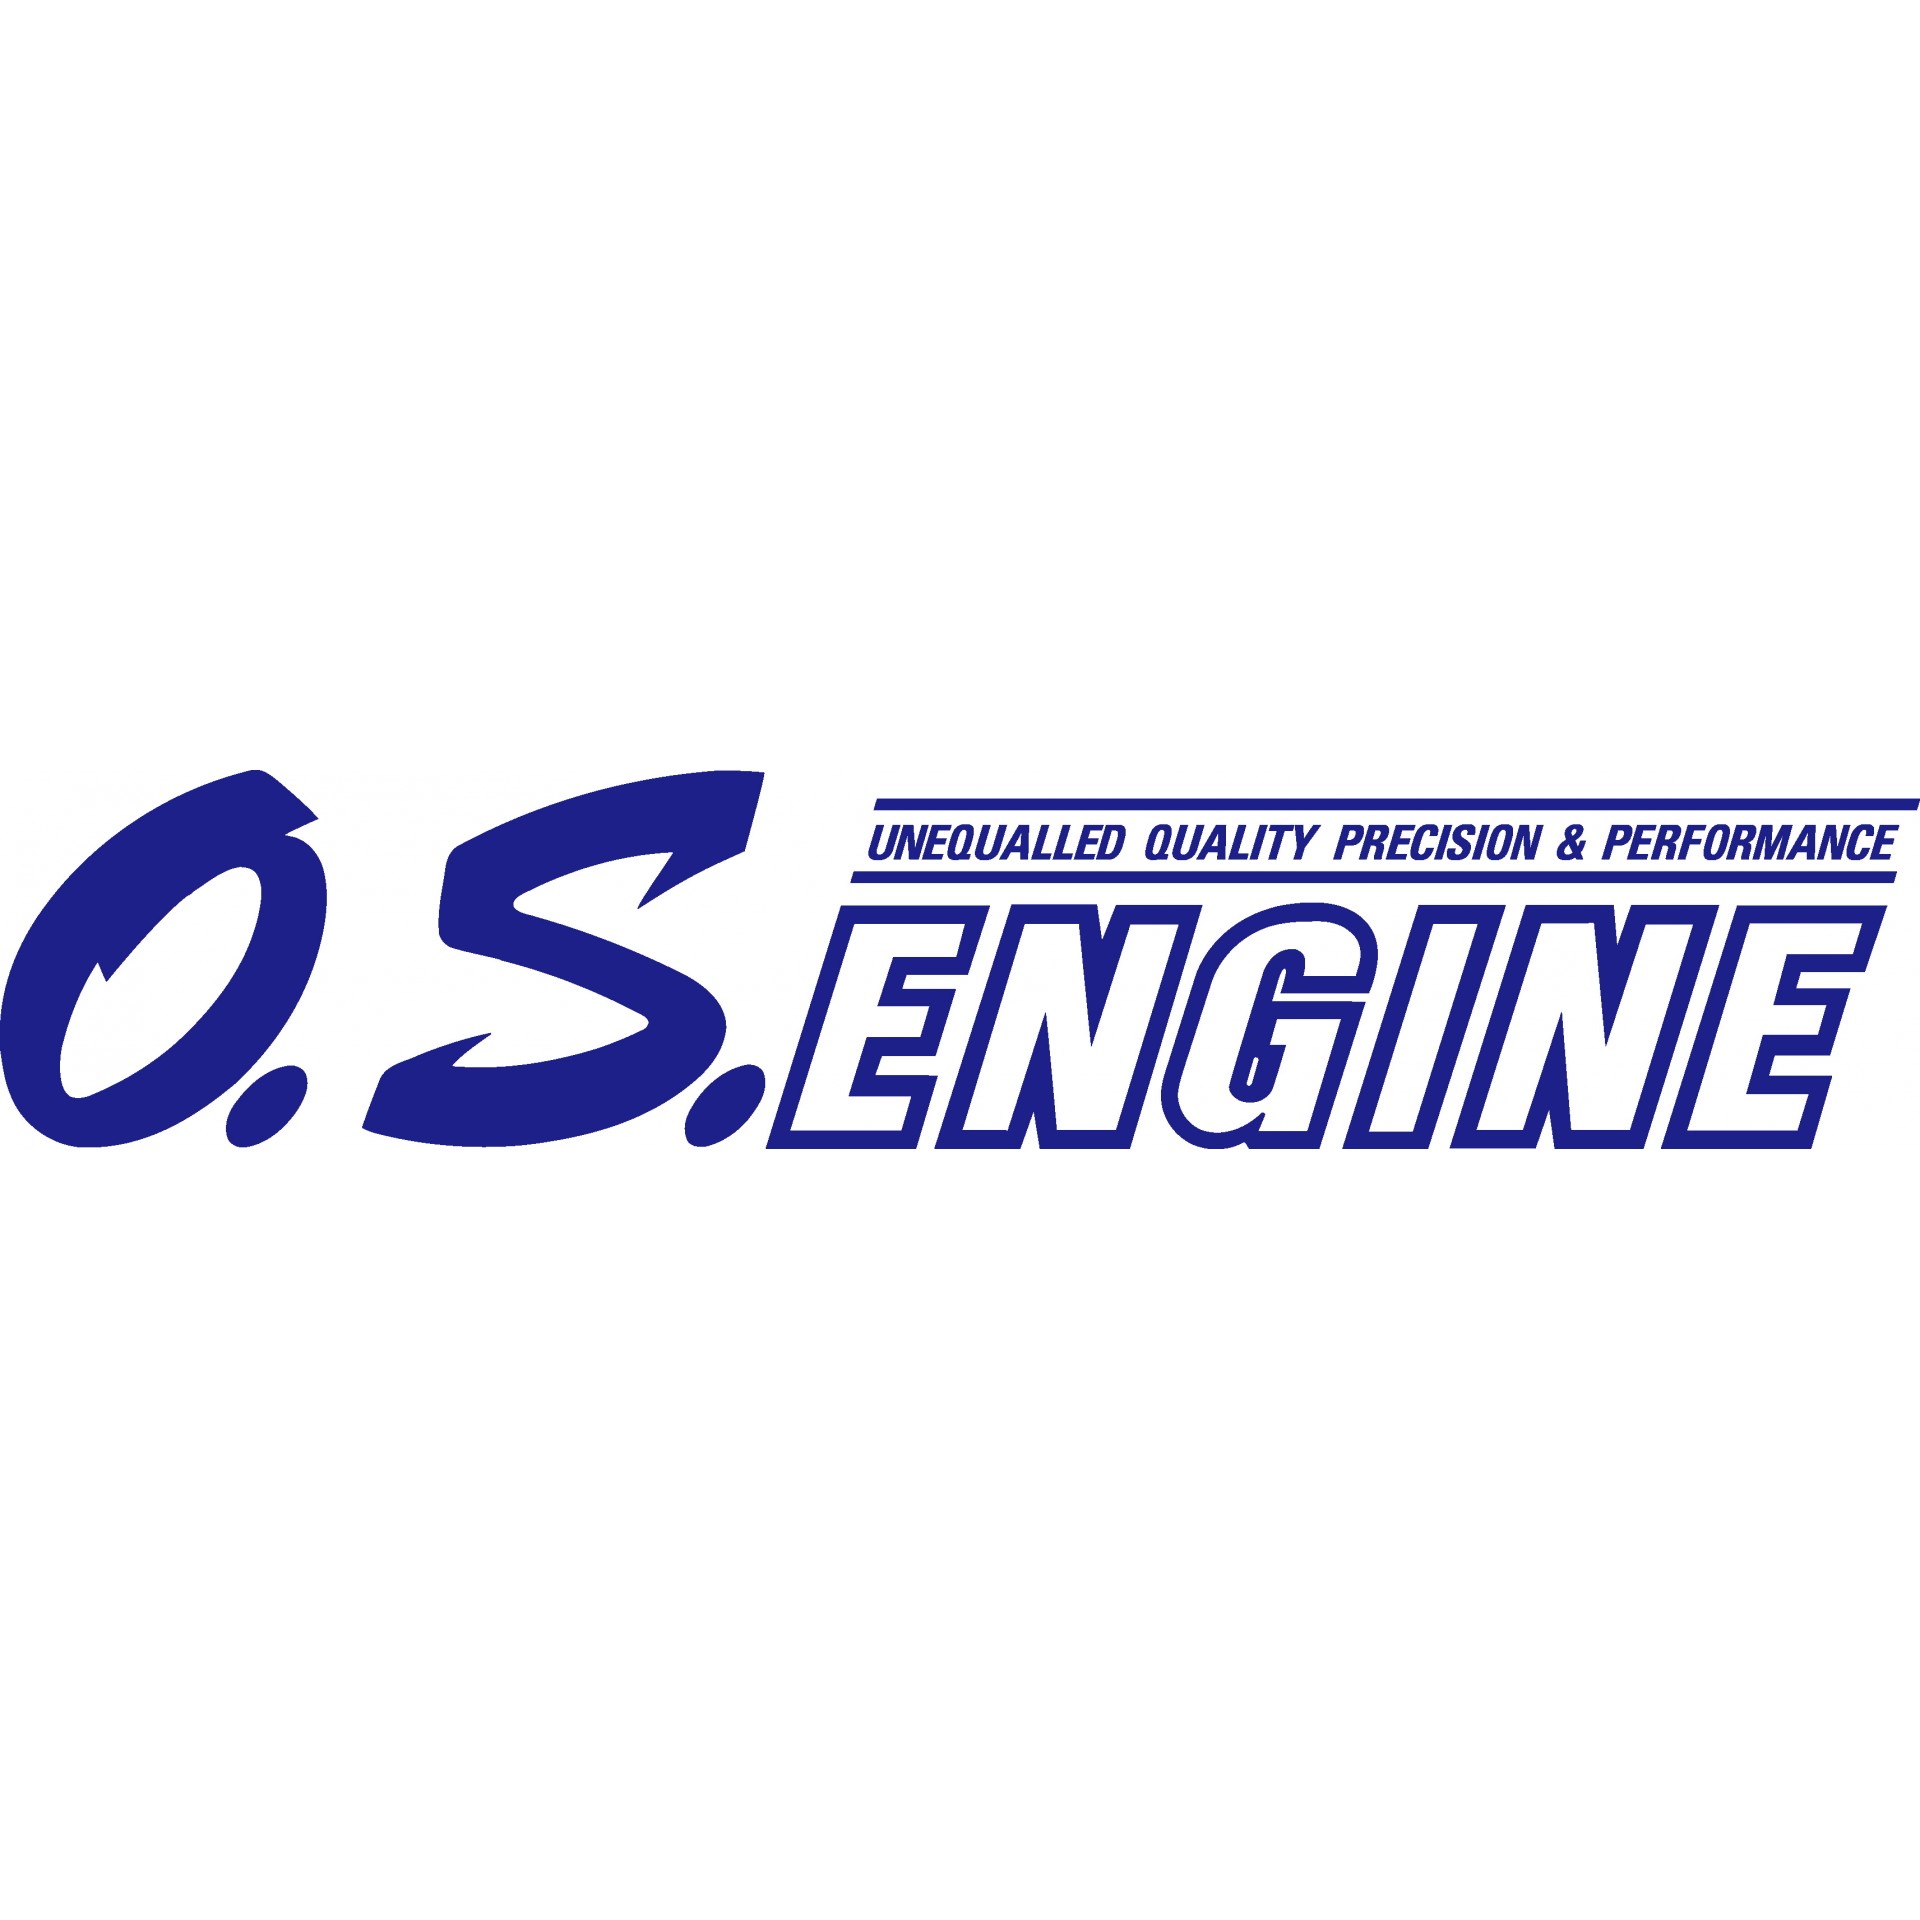 O.S. Engines, for radio control airplanes, helicpters, cars, boats